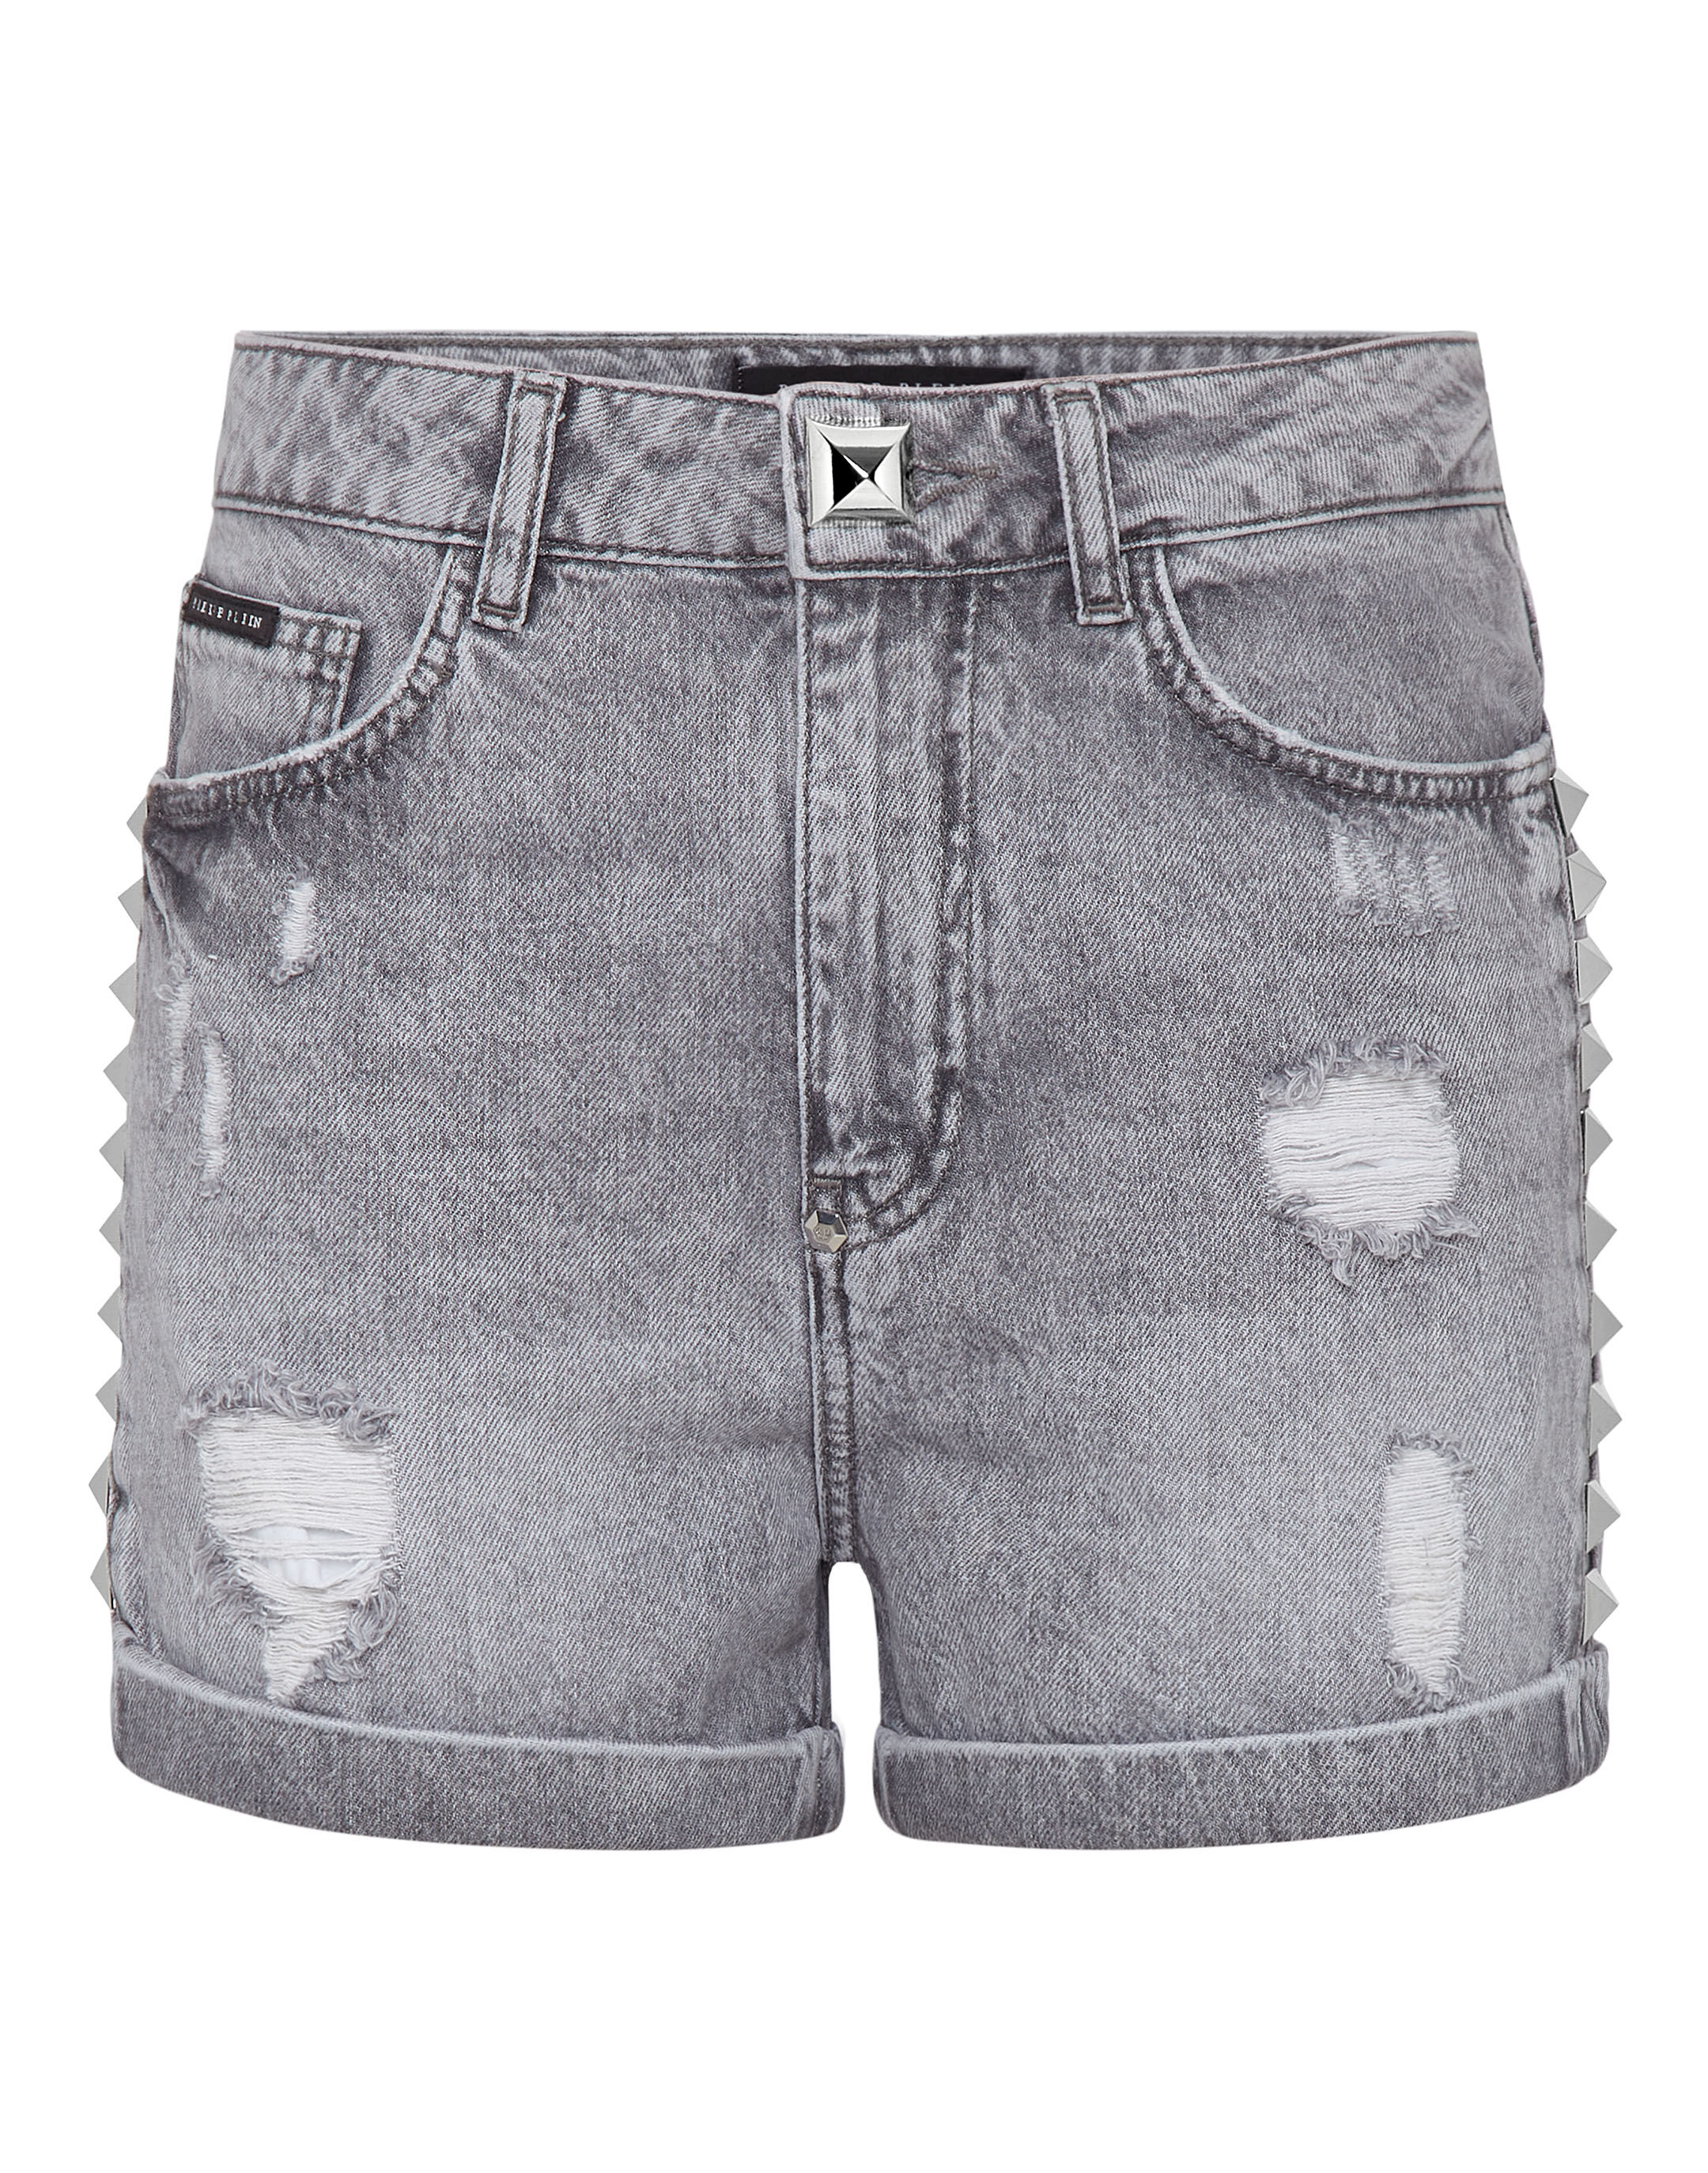 Women's Mid-Rise Shorts Cotton Stretchy Denim Hot Pants for Summer Casual |  Fruugo KR